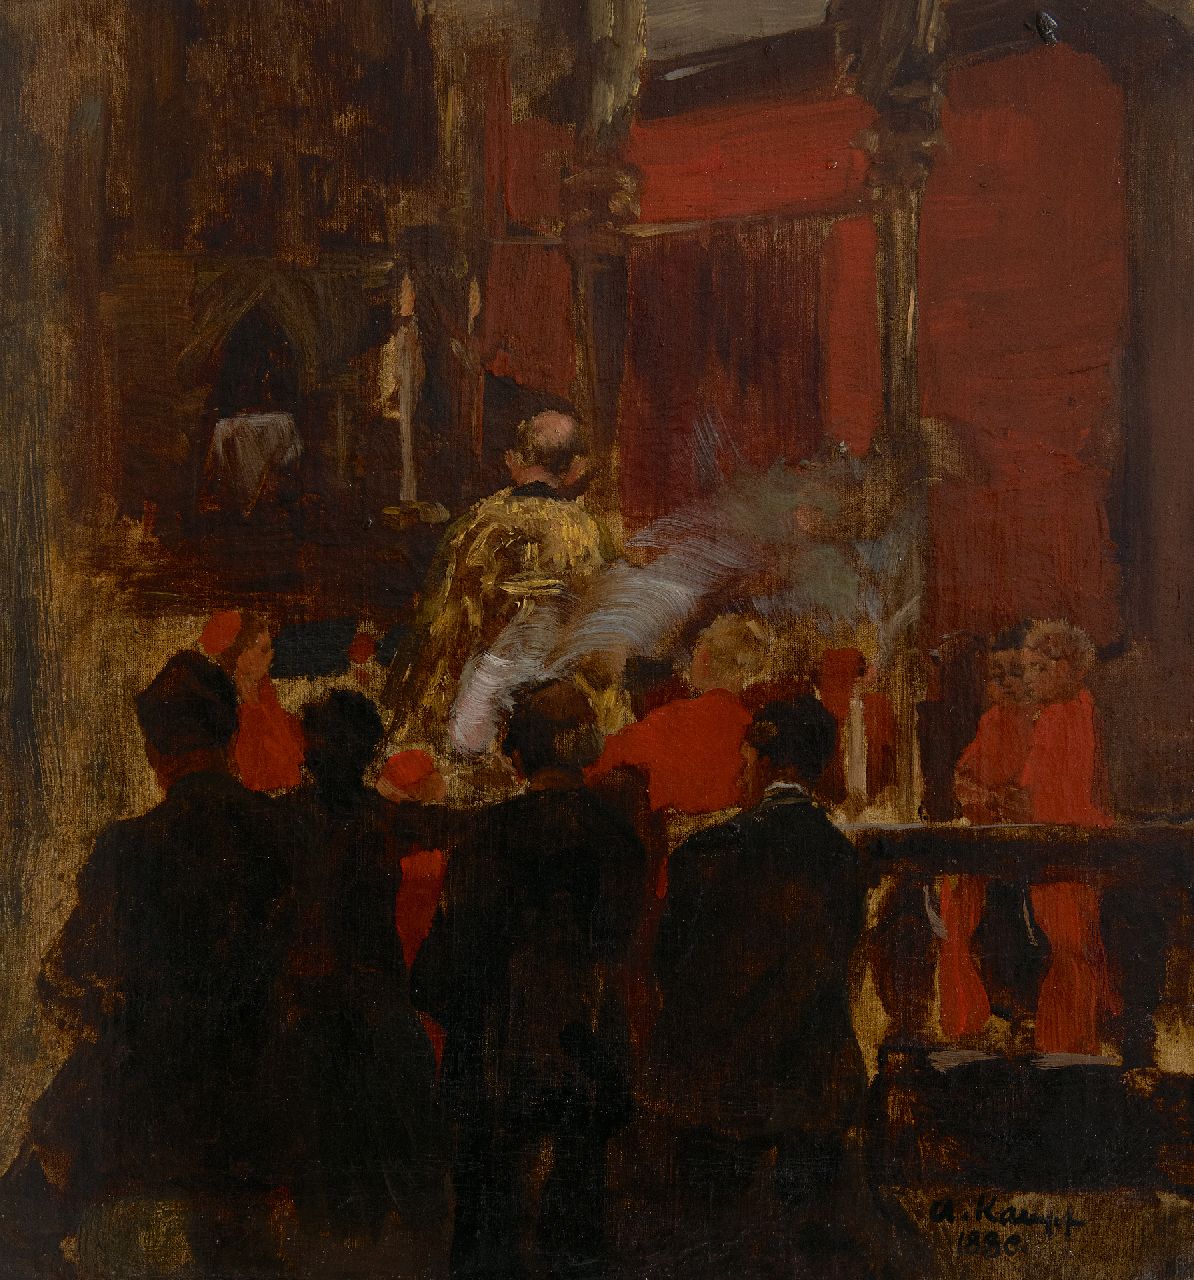 Kampf E.P.A.  | Egbert Paul 'Arthur' Kampf | Paintings offered for sale | At the choir, oil on canvas 31.9 x 30.2 cm, signed l.r. and dated 1880